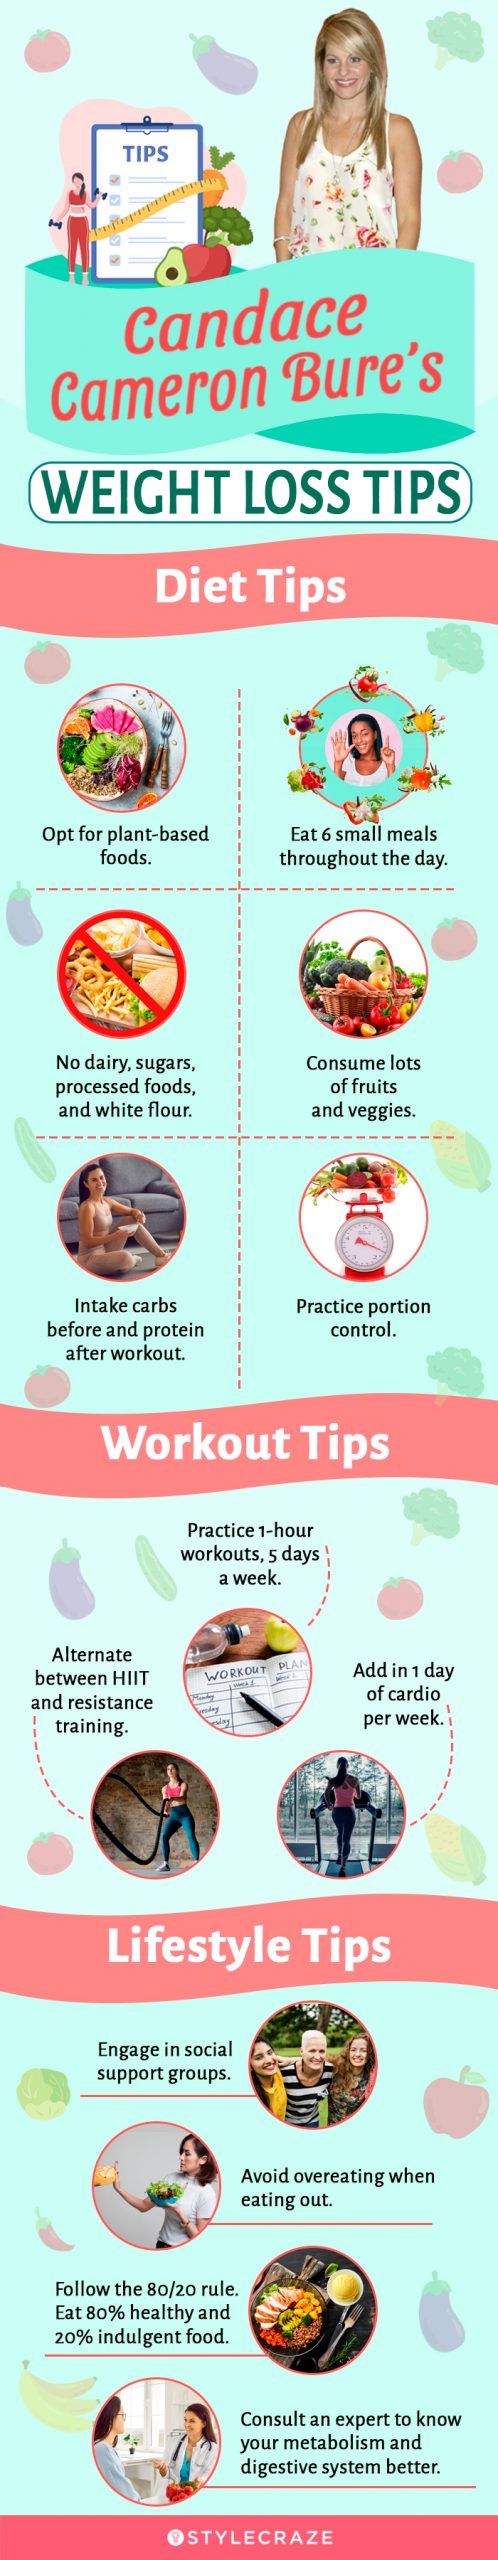 candace cameron bure’s weight loss tips (infographic)